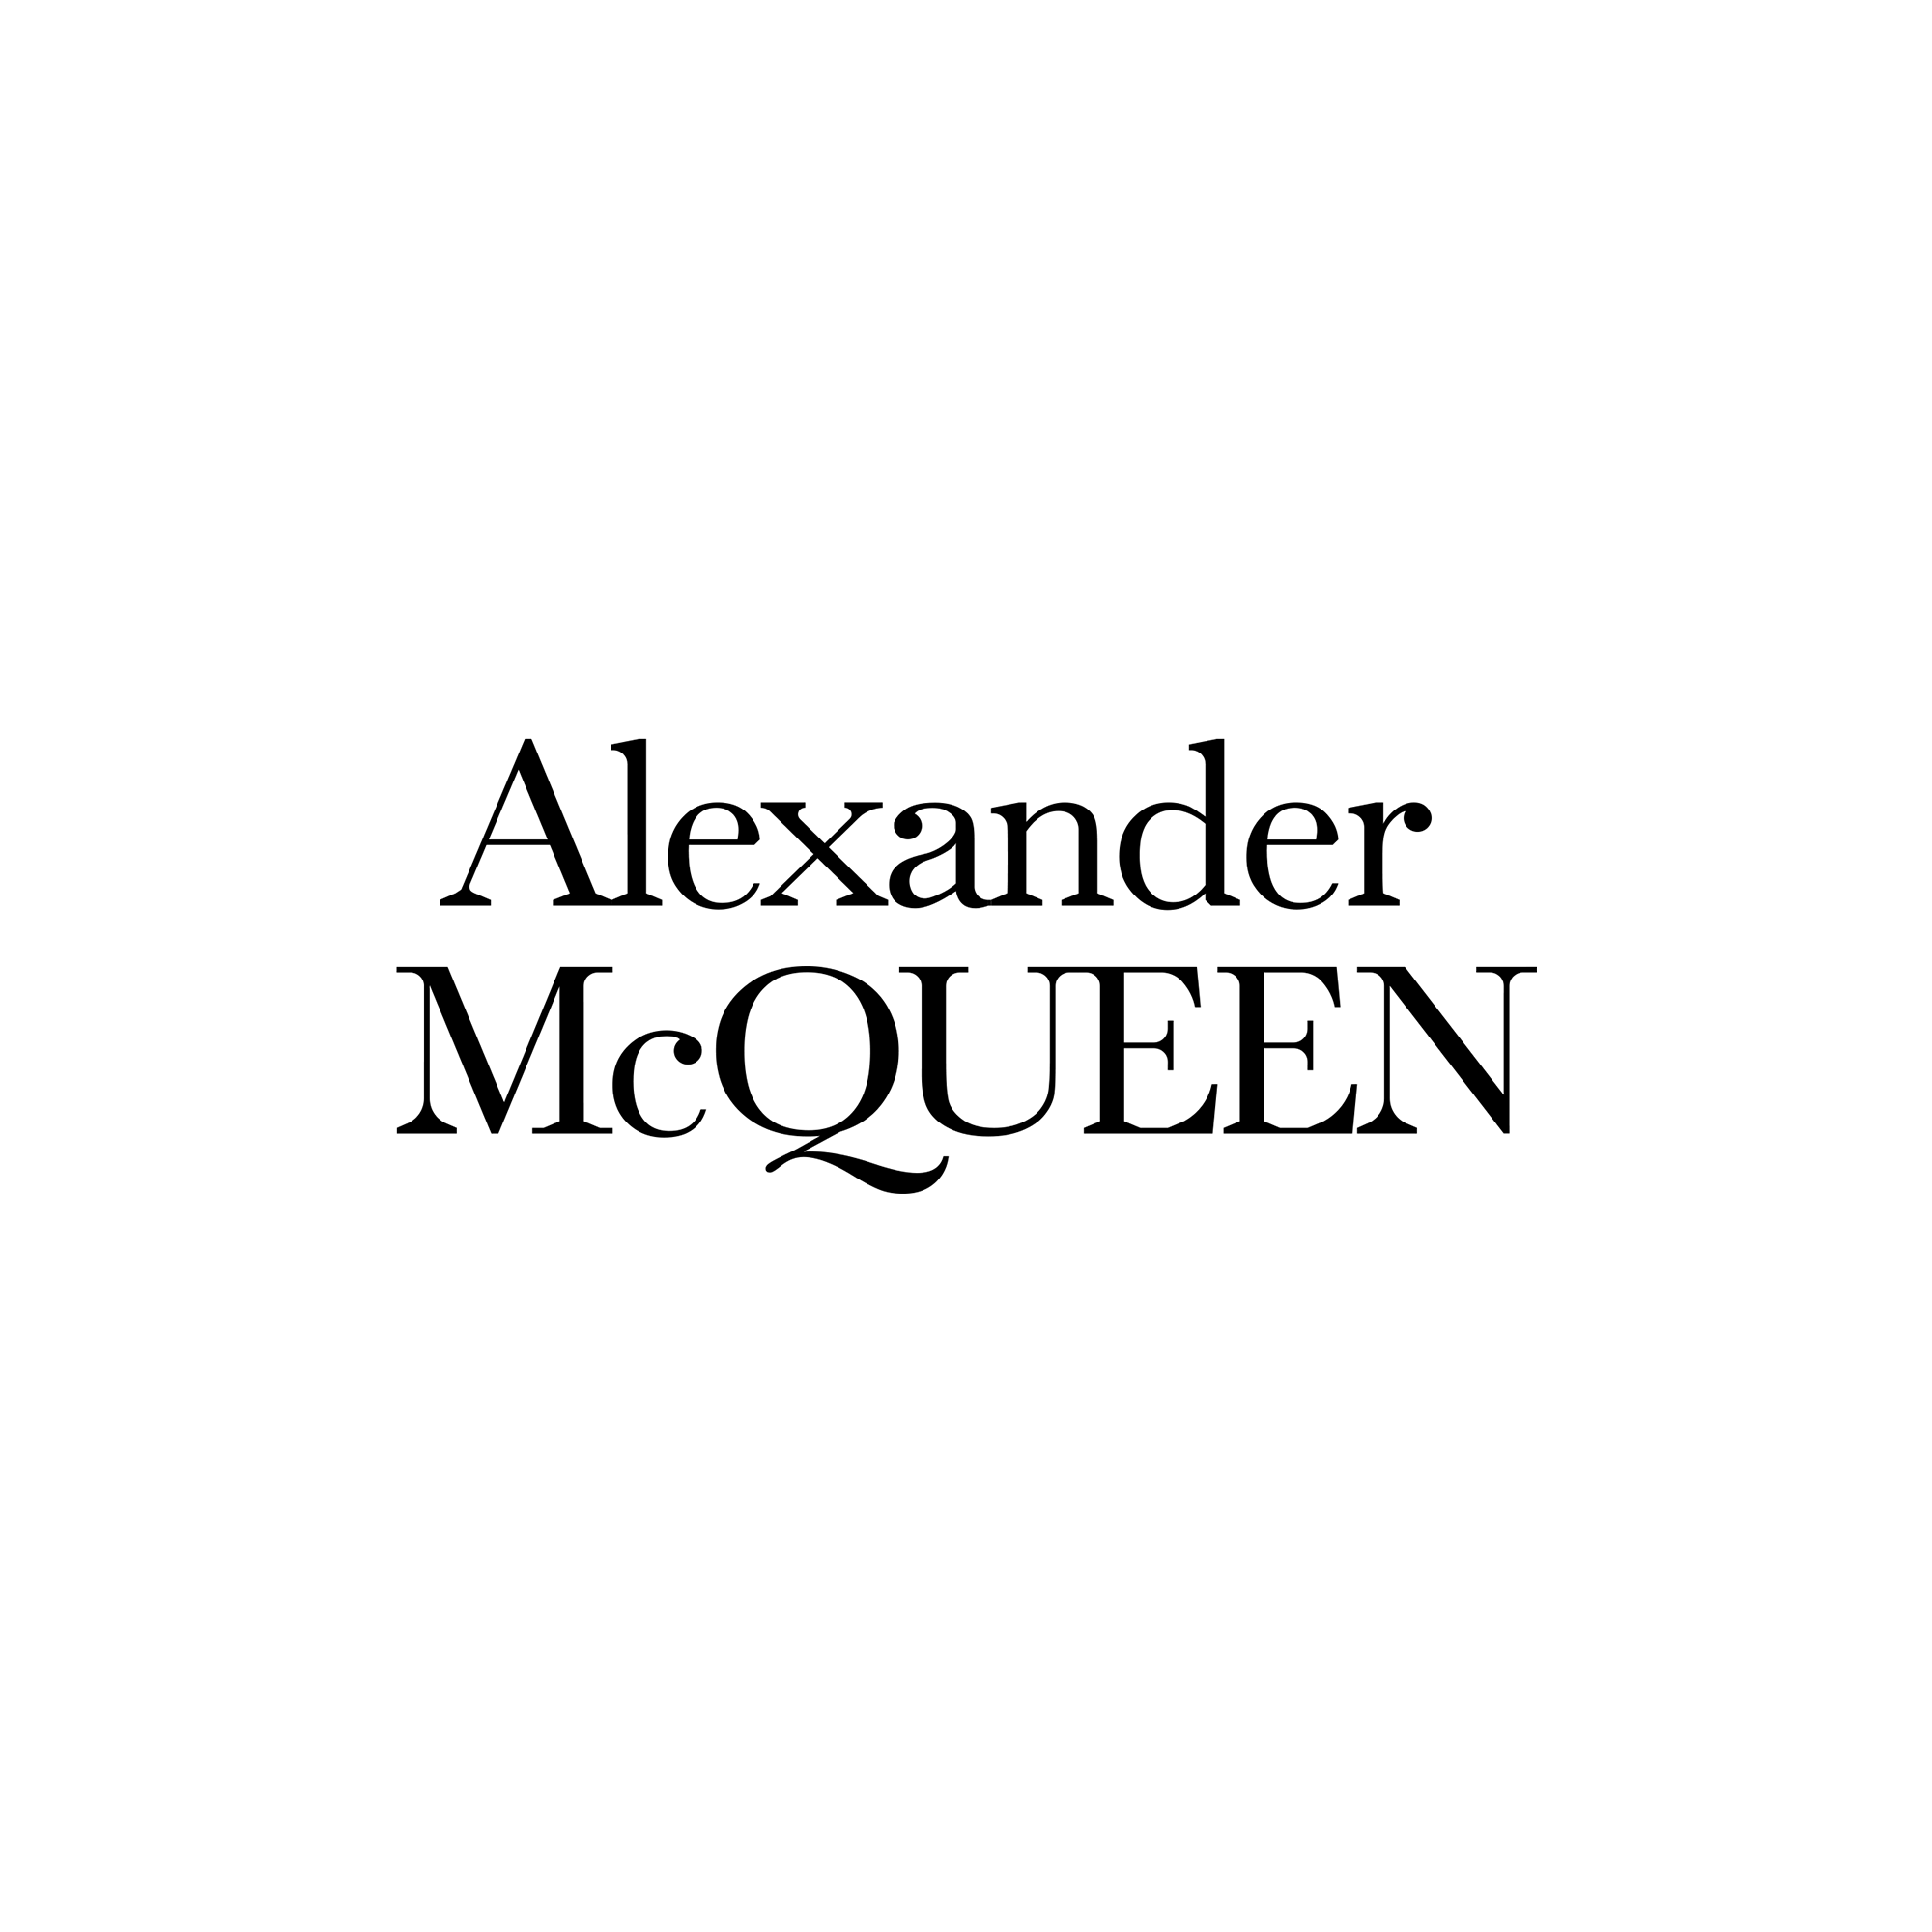 See Alexander McQueens Latest Collections For Men and Women - A&E